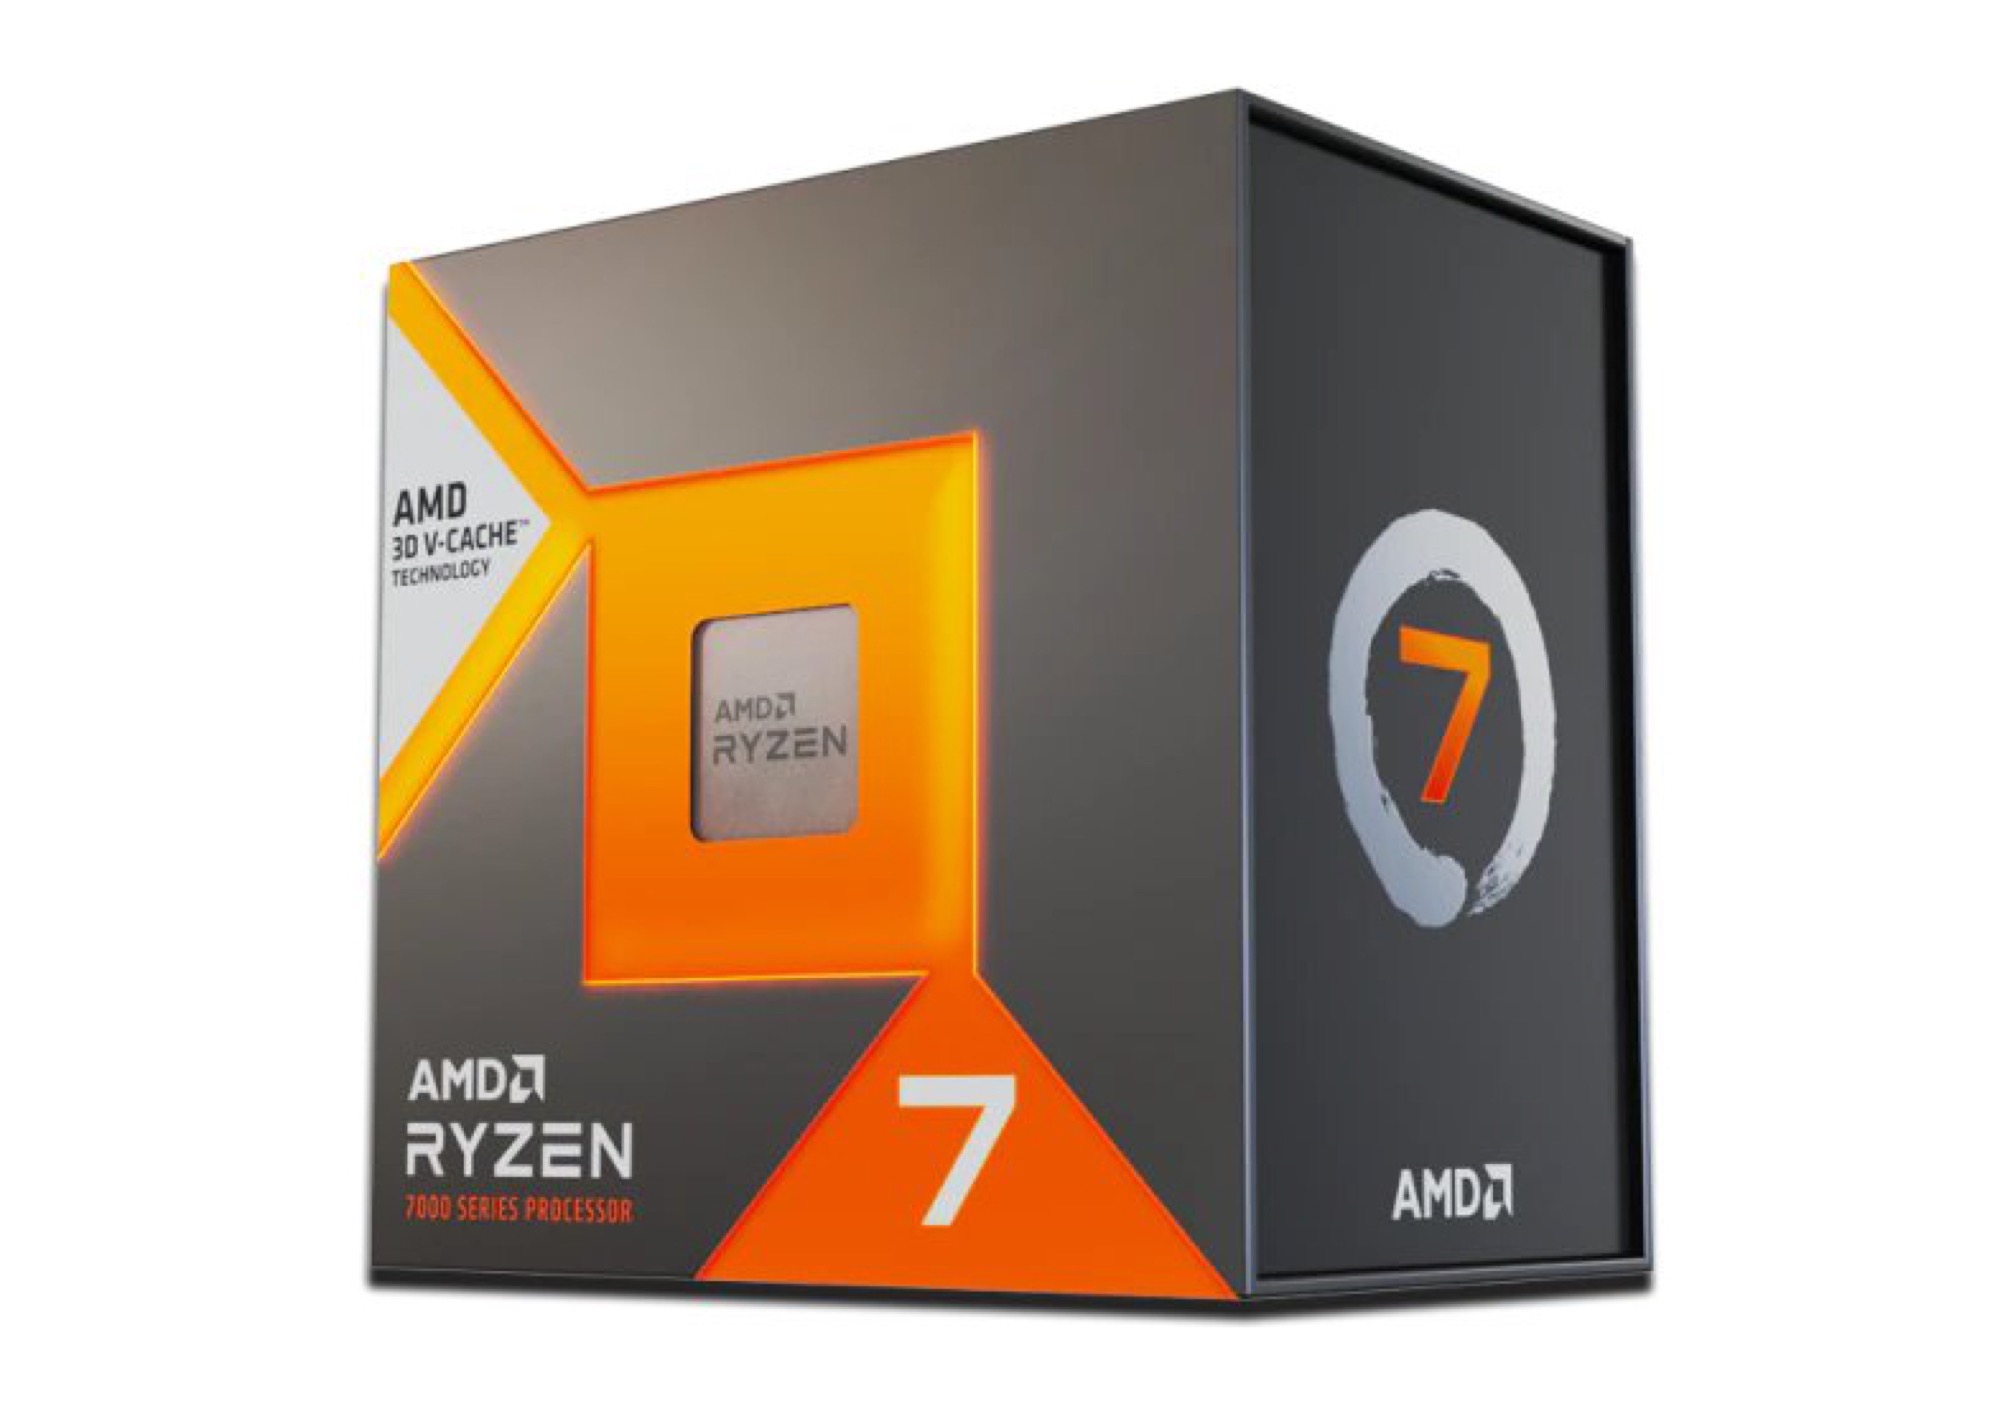 AMD Ryzen 7 7800X3D launch review roundup depicts CPU beating Intel Core  i9-13900K/KS in gaming while using less than half the power -   News